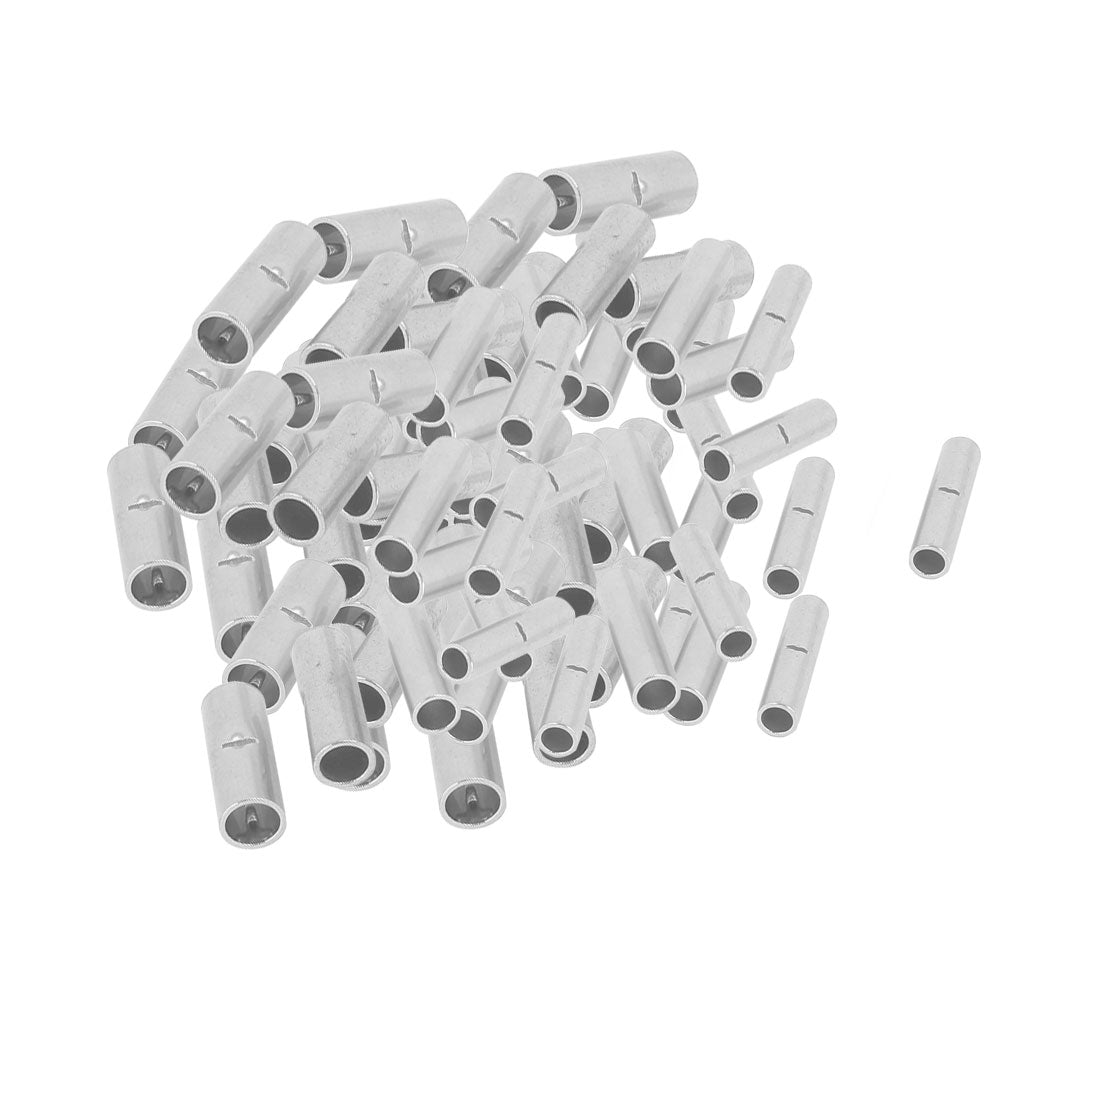 uxcell Uxcell 88Pcs BN5.5 BN3.5 BN2 BN1 Uninsulated Connector Terminal for 22-10 AWG Cable Wire